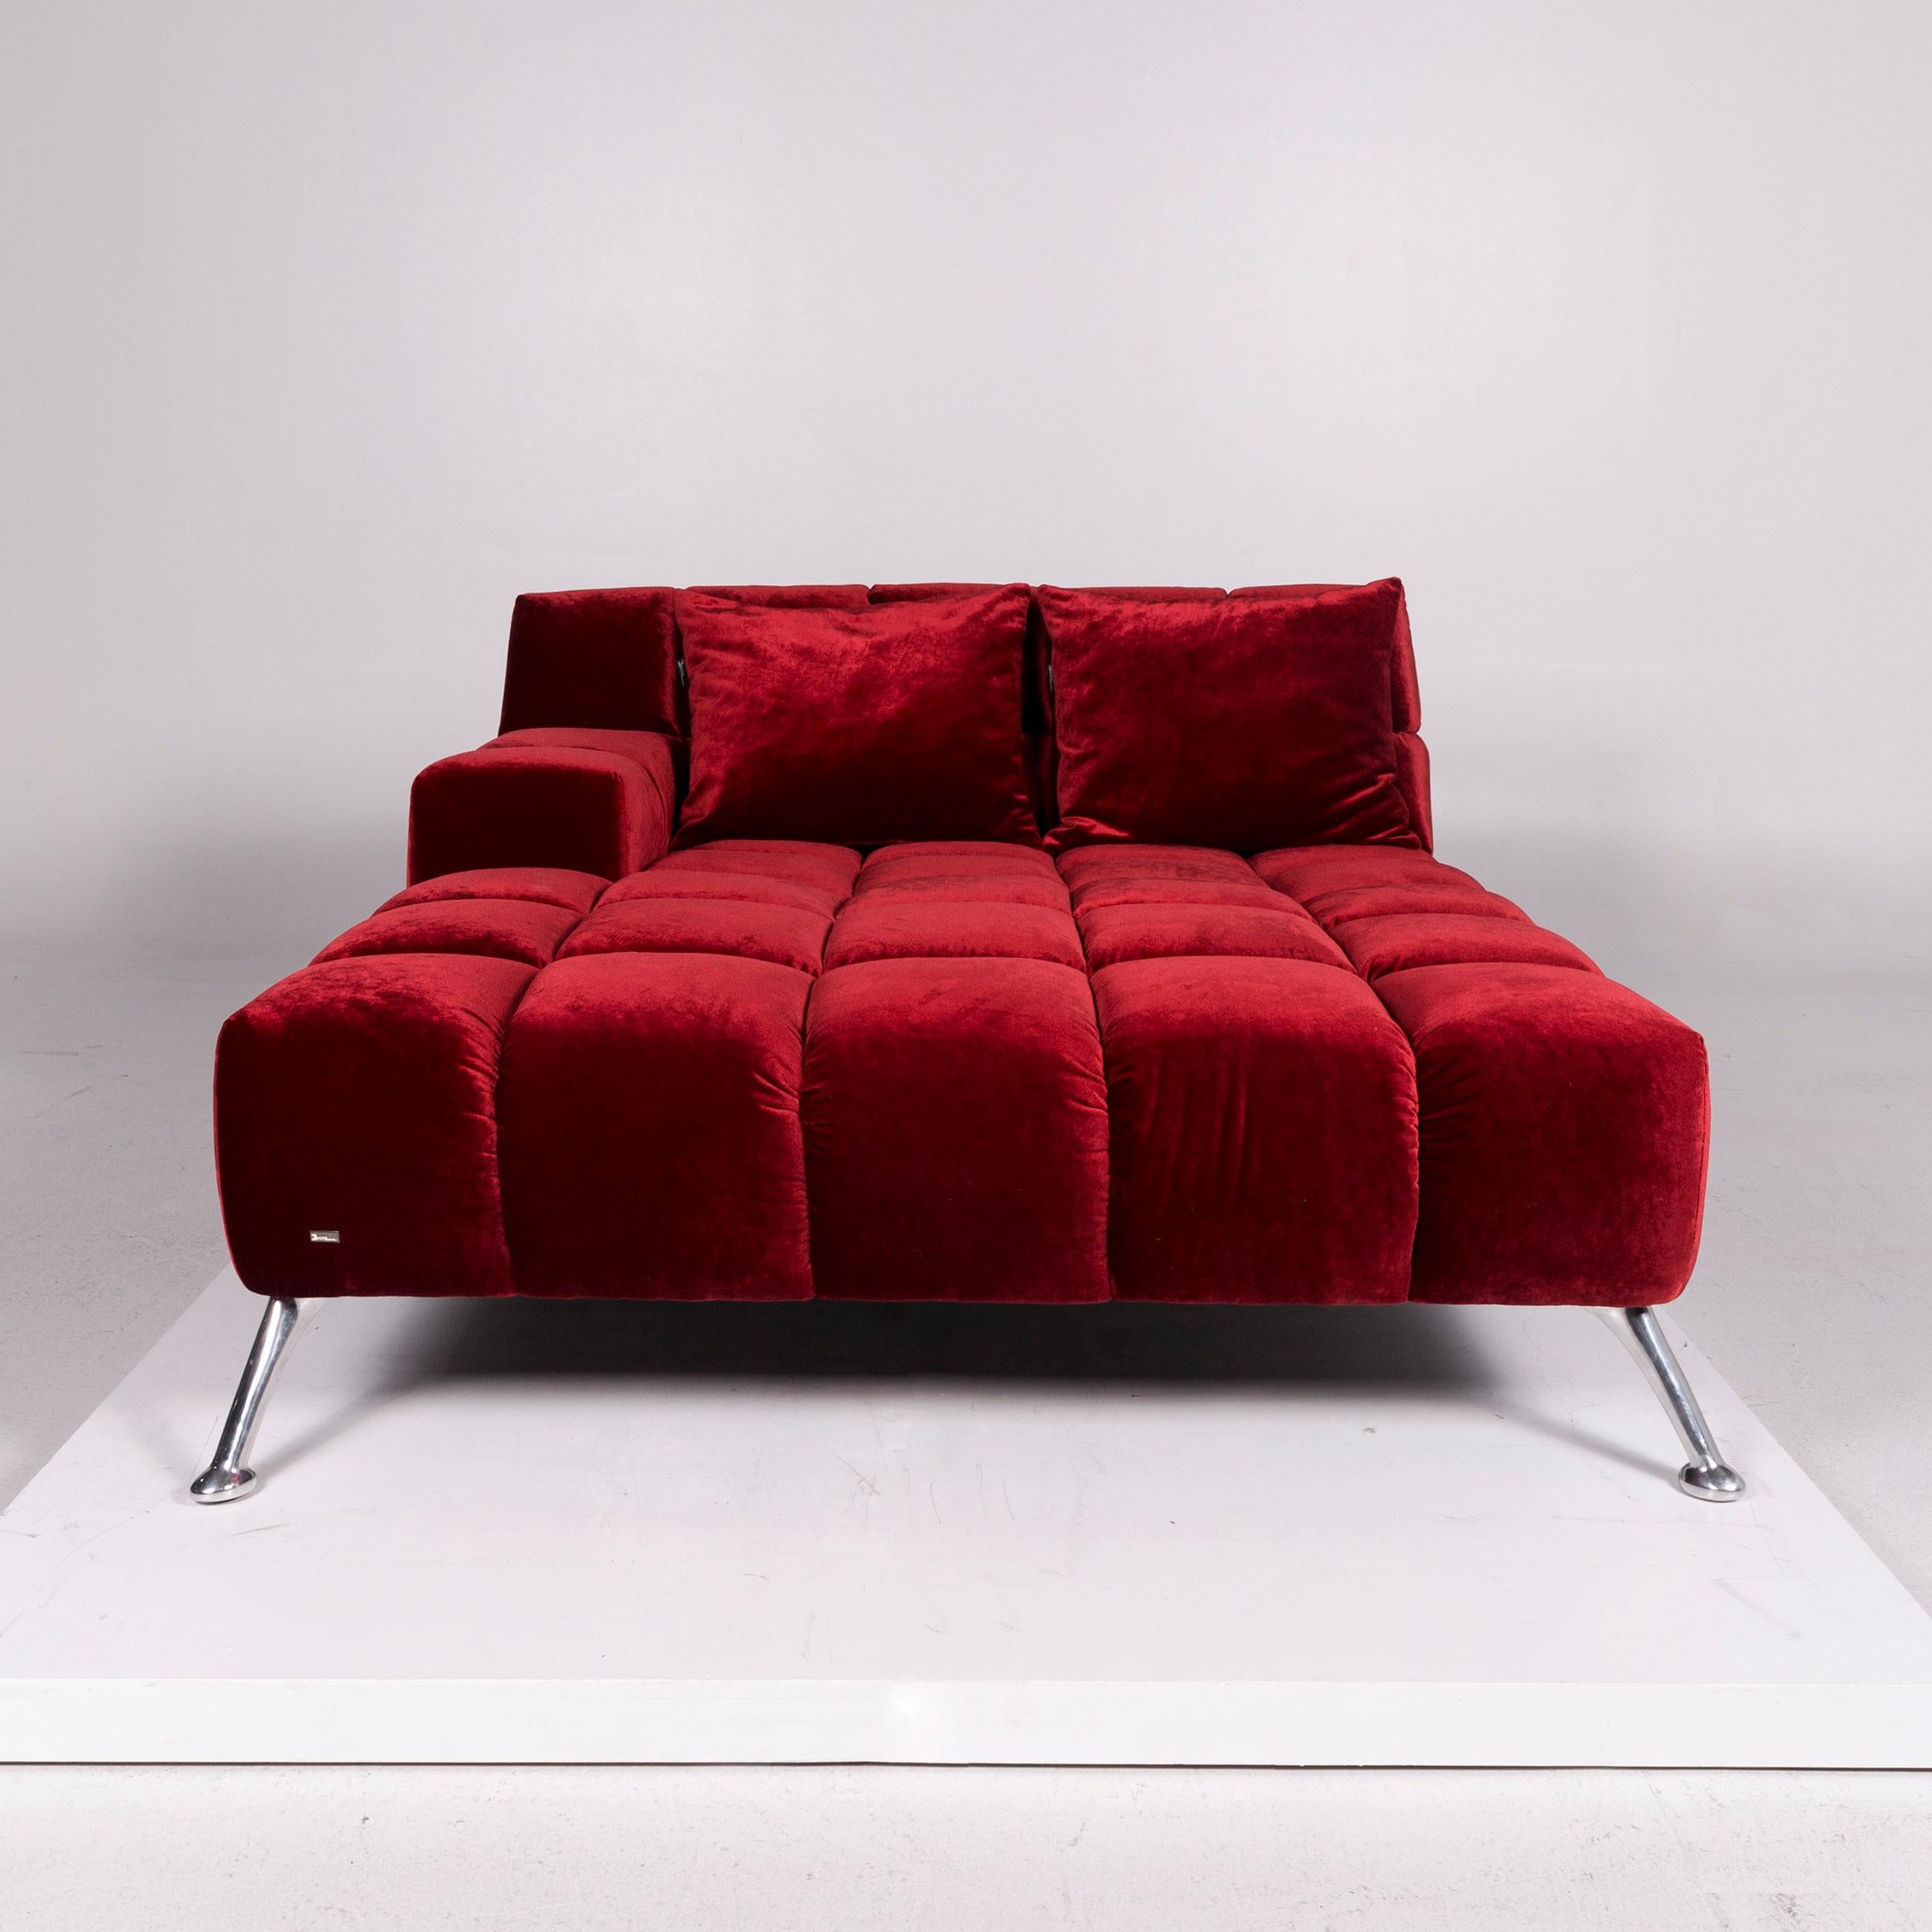 We bring to you a Bretz velvet fabric lounger red.


 Product measurements in centimeters:
 

Depth 200
Width 174
Height 90
Seat-height 57
Rest-height 70
Seat-depth 162
Seat-width 132
Back-height 40.
 